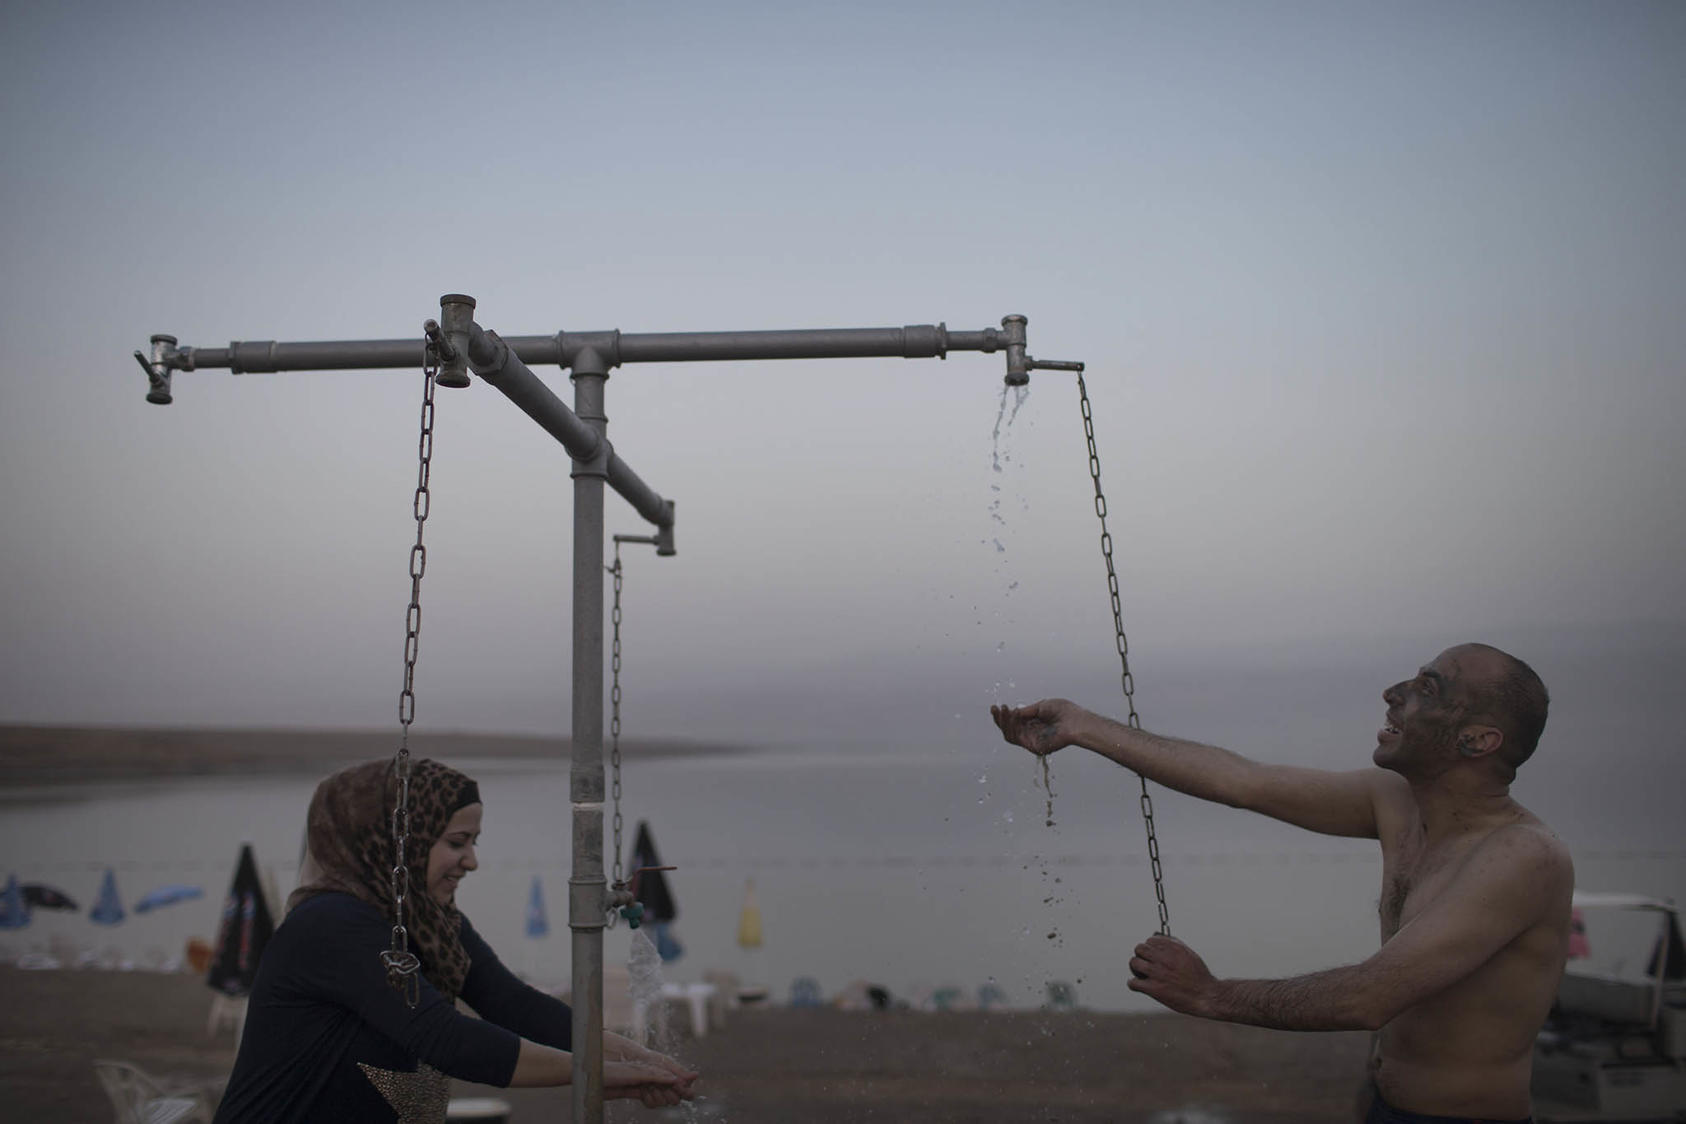 Palestinians use the showers at the beach at Kalia, in the West Bank, April 28, 2015. (Uriel Sinai/The New York Times)